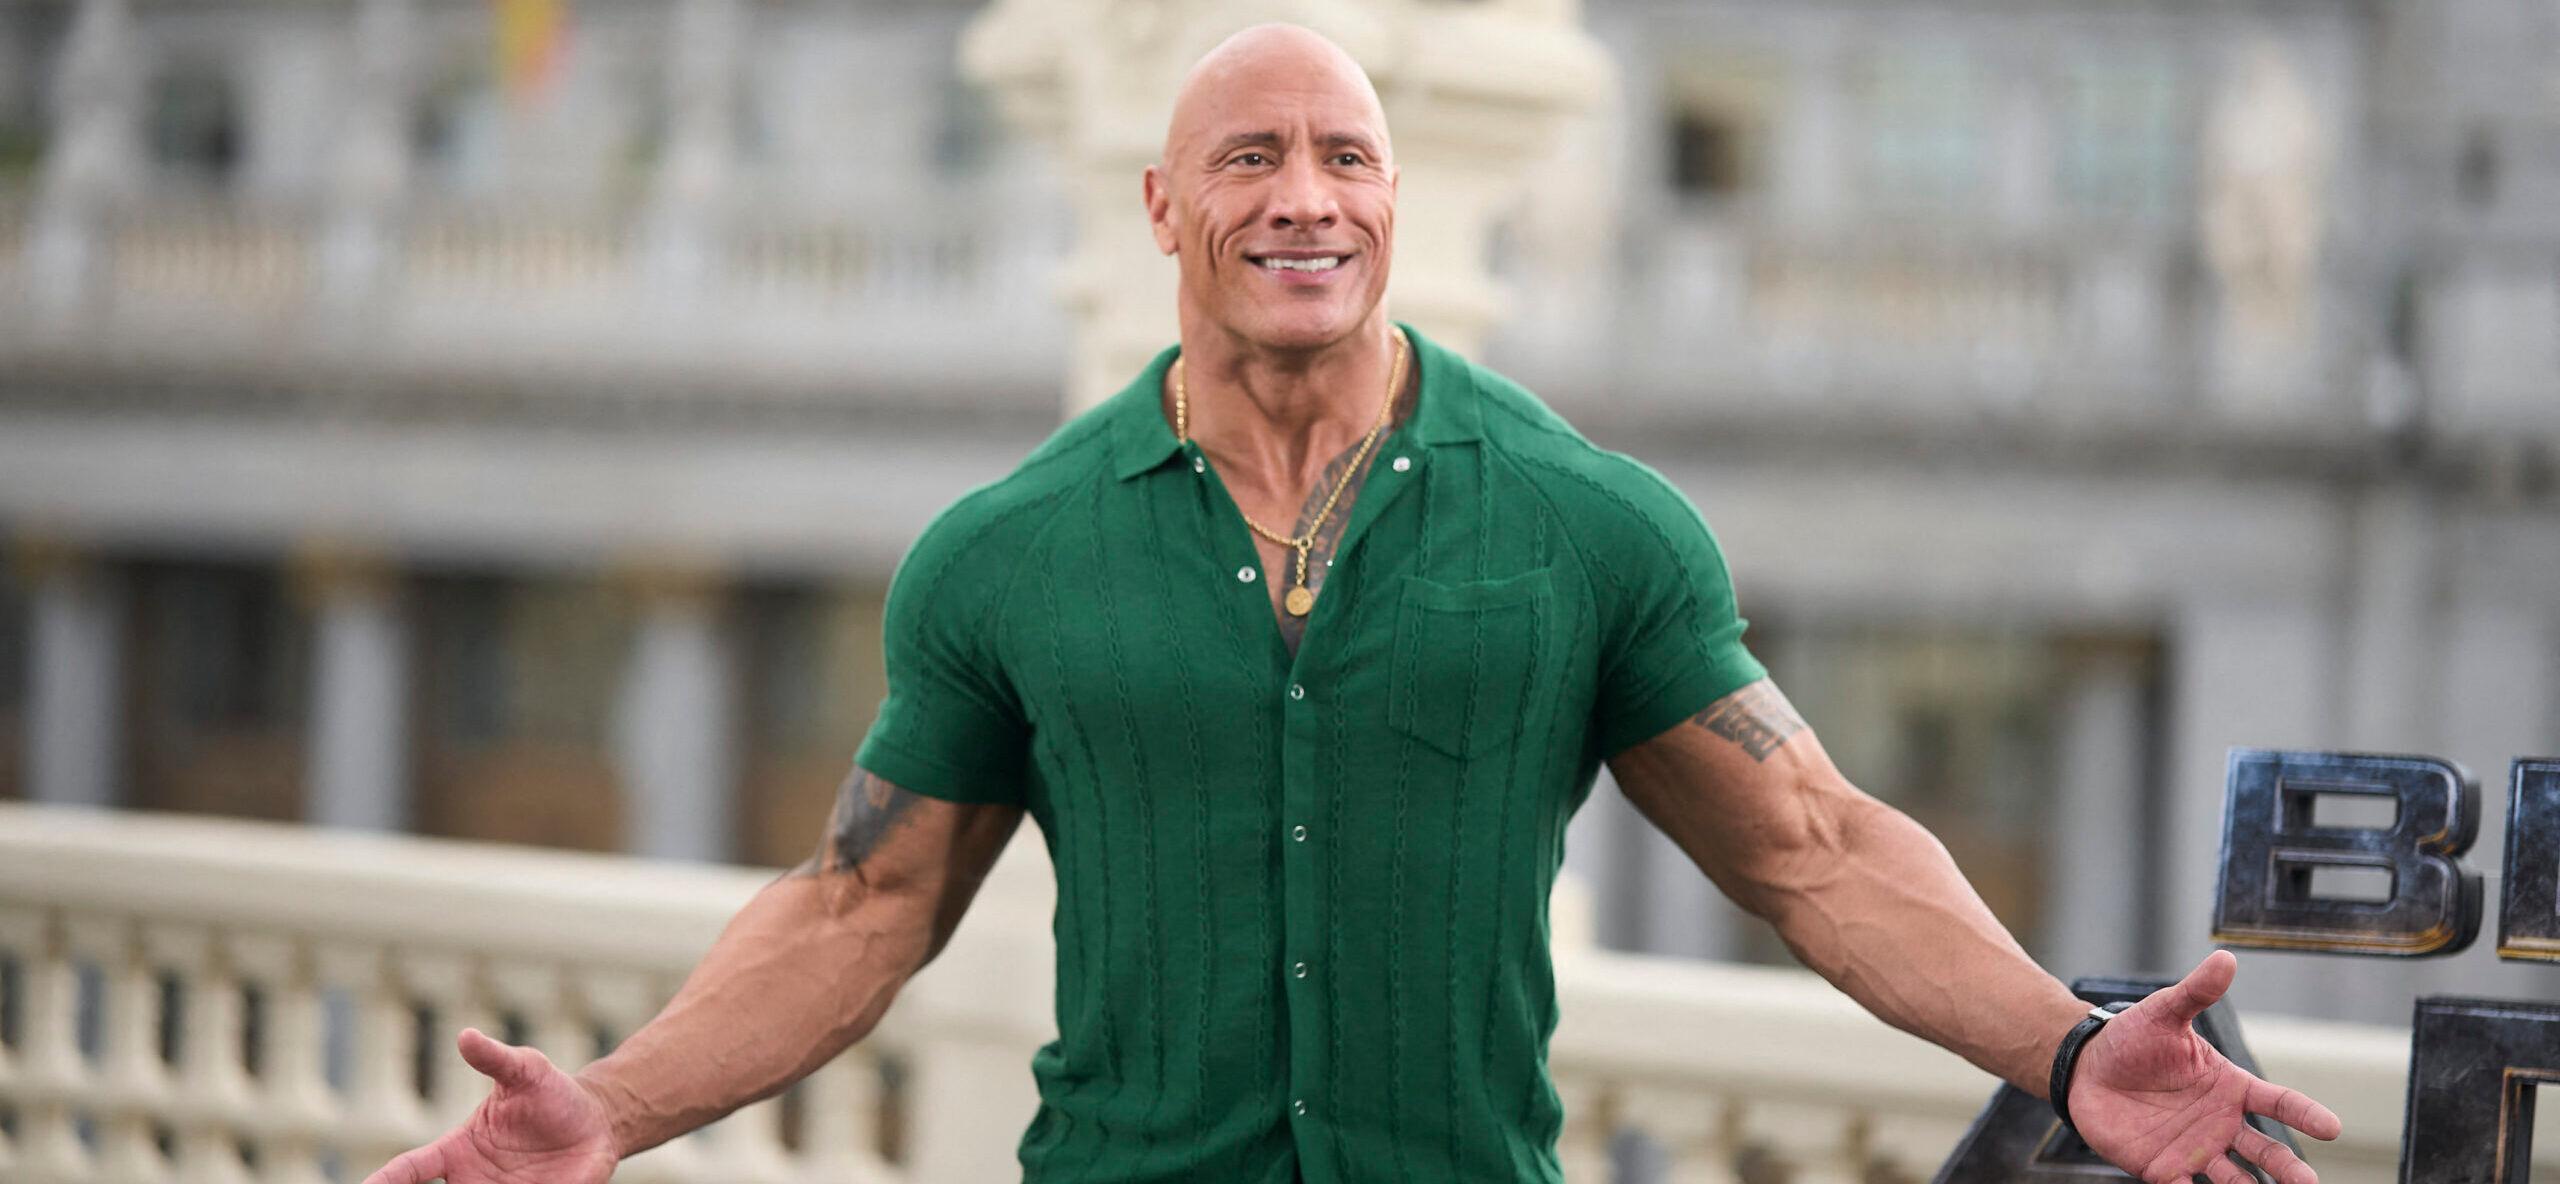 Dwayne Johnson’s ‘Young Rock’ Among NBC Cancelations This Week